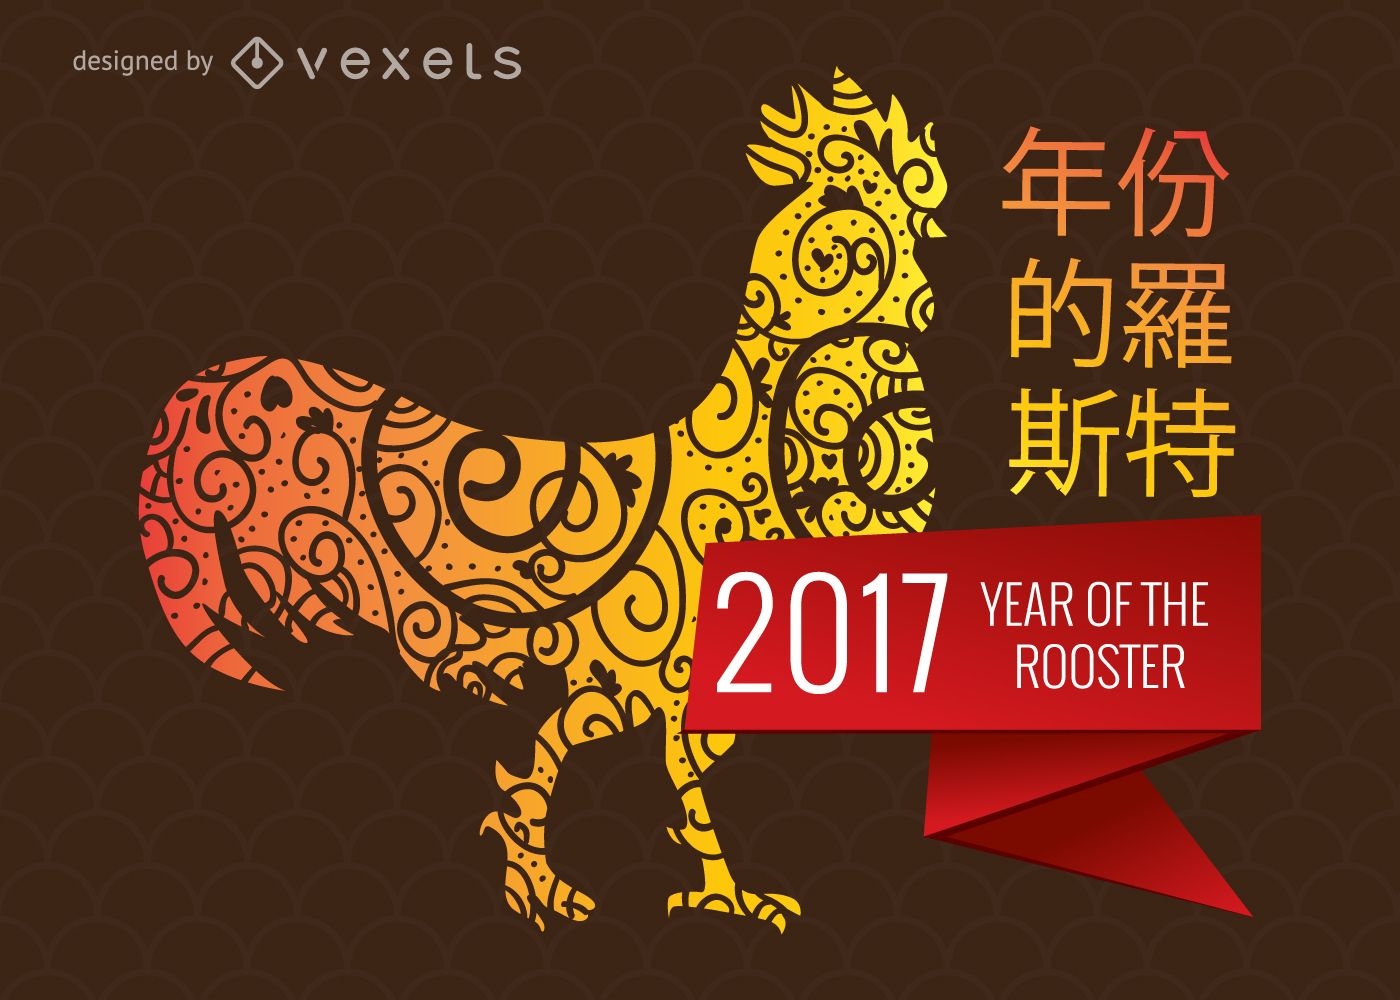 2017 Year of the Rooster poster